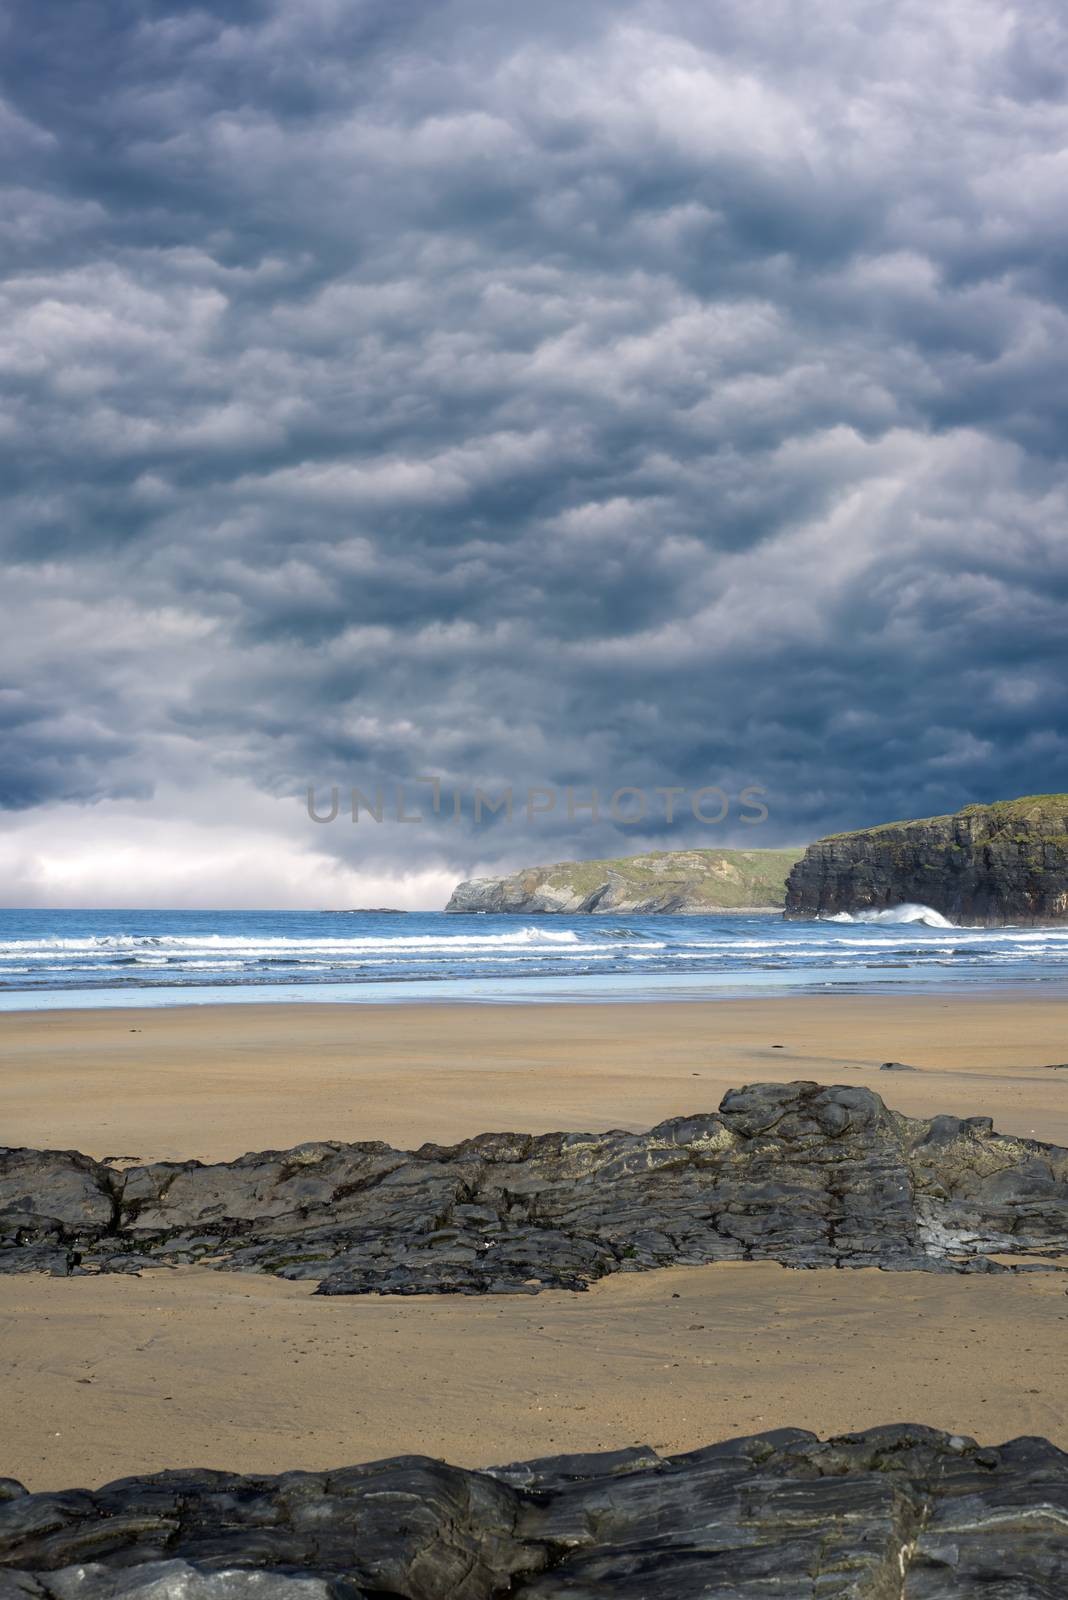 storm clouds with soft waves break on the beach and rocky sand at ballybunion